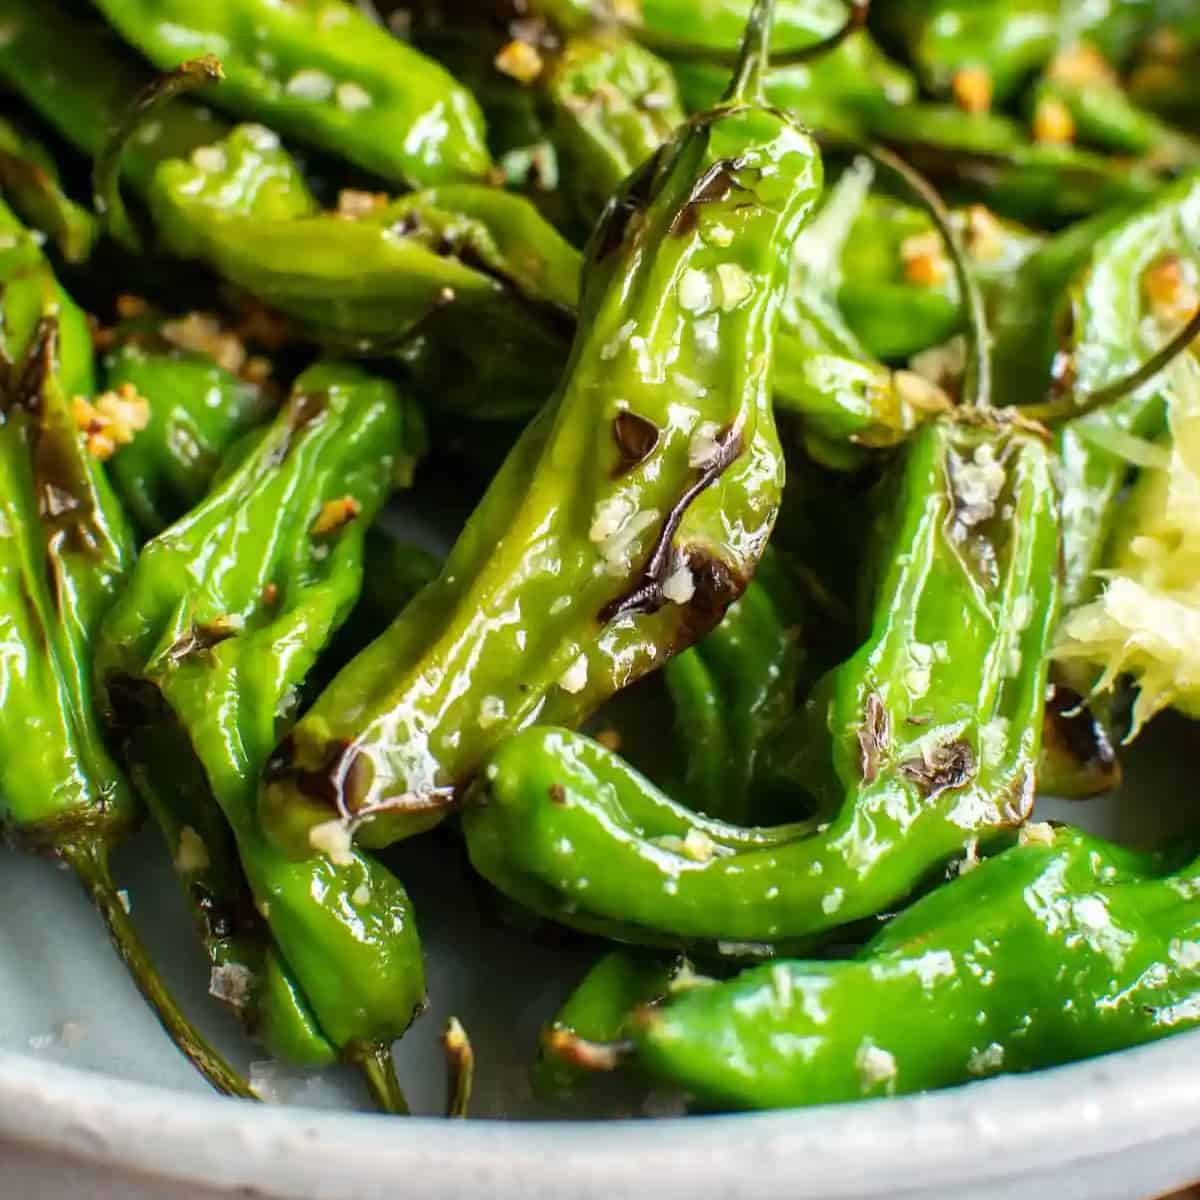 Blistered Garlicky Shishito Peppers from Hola Jalapeno